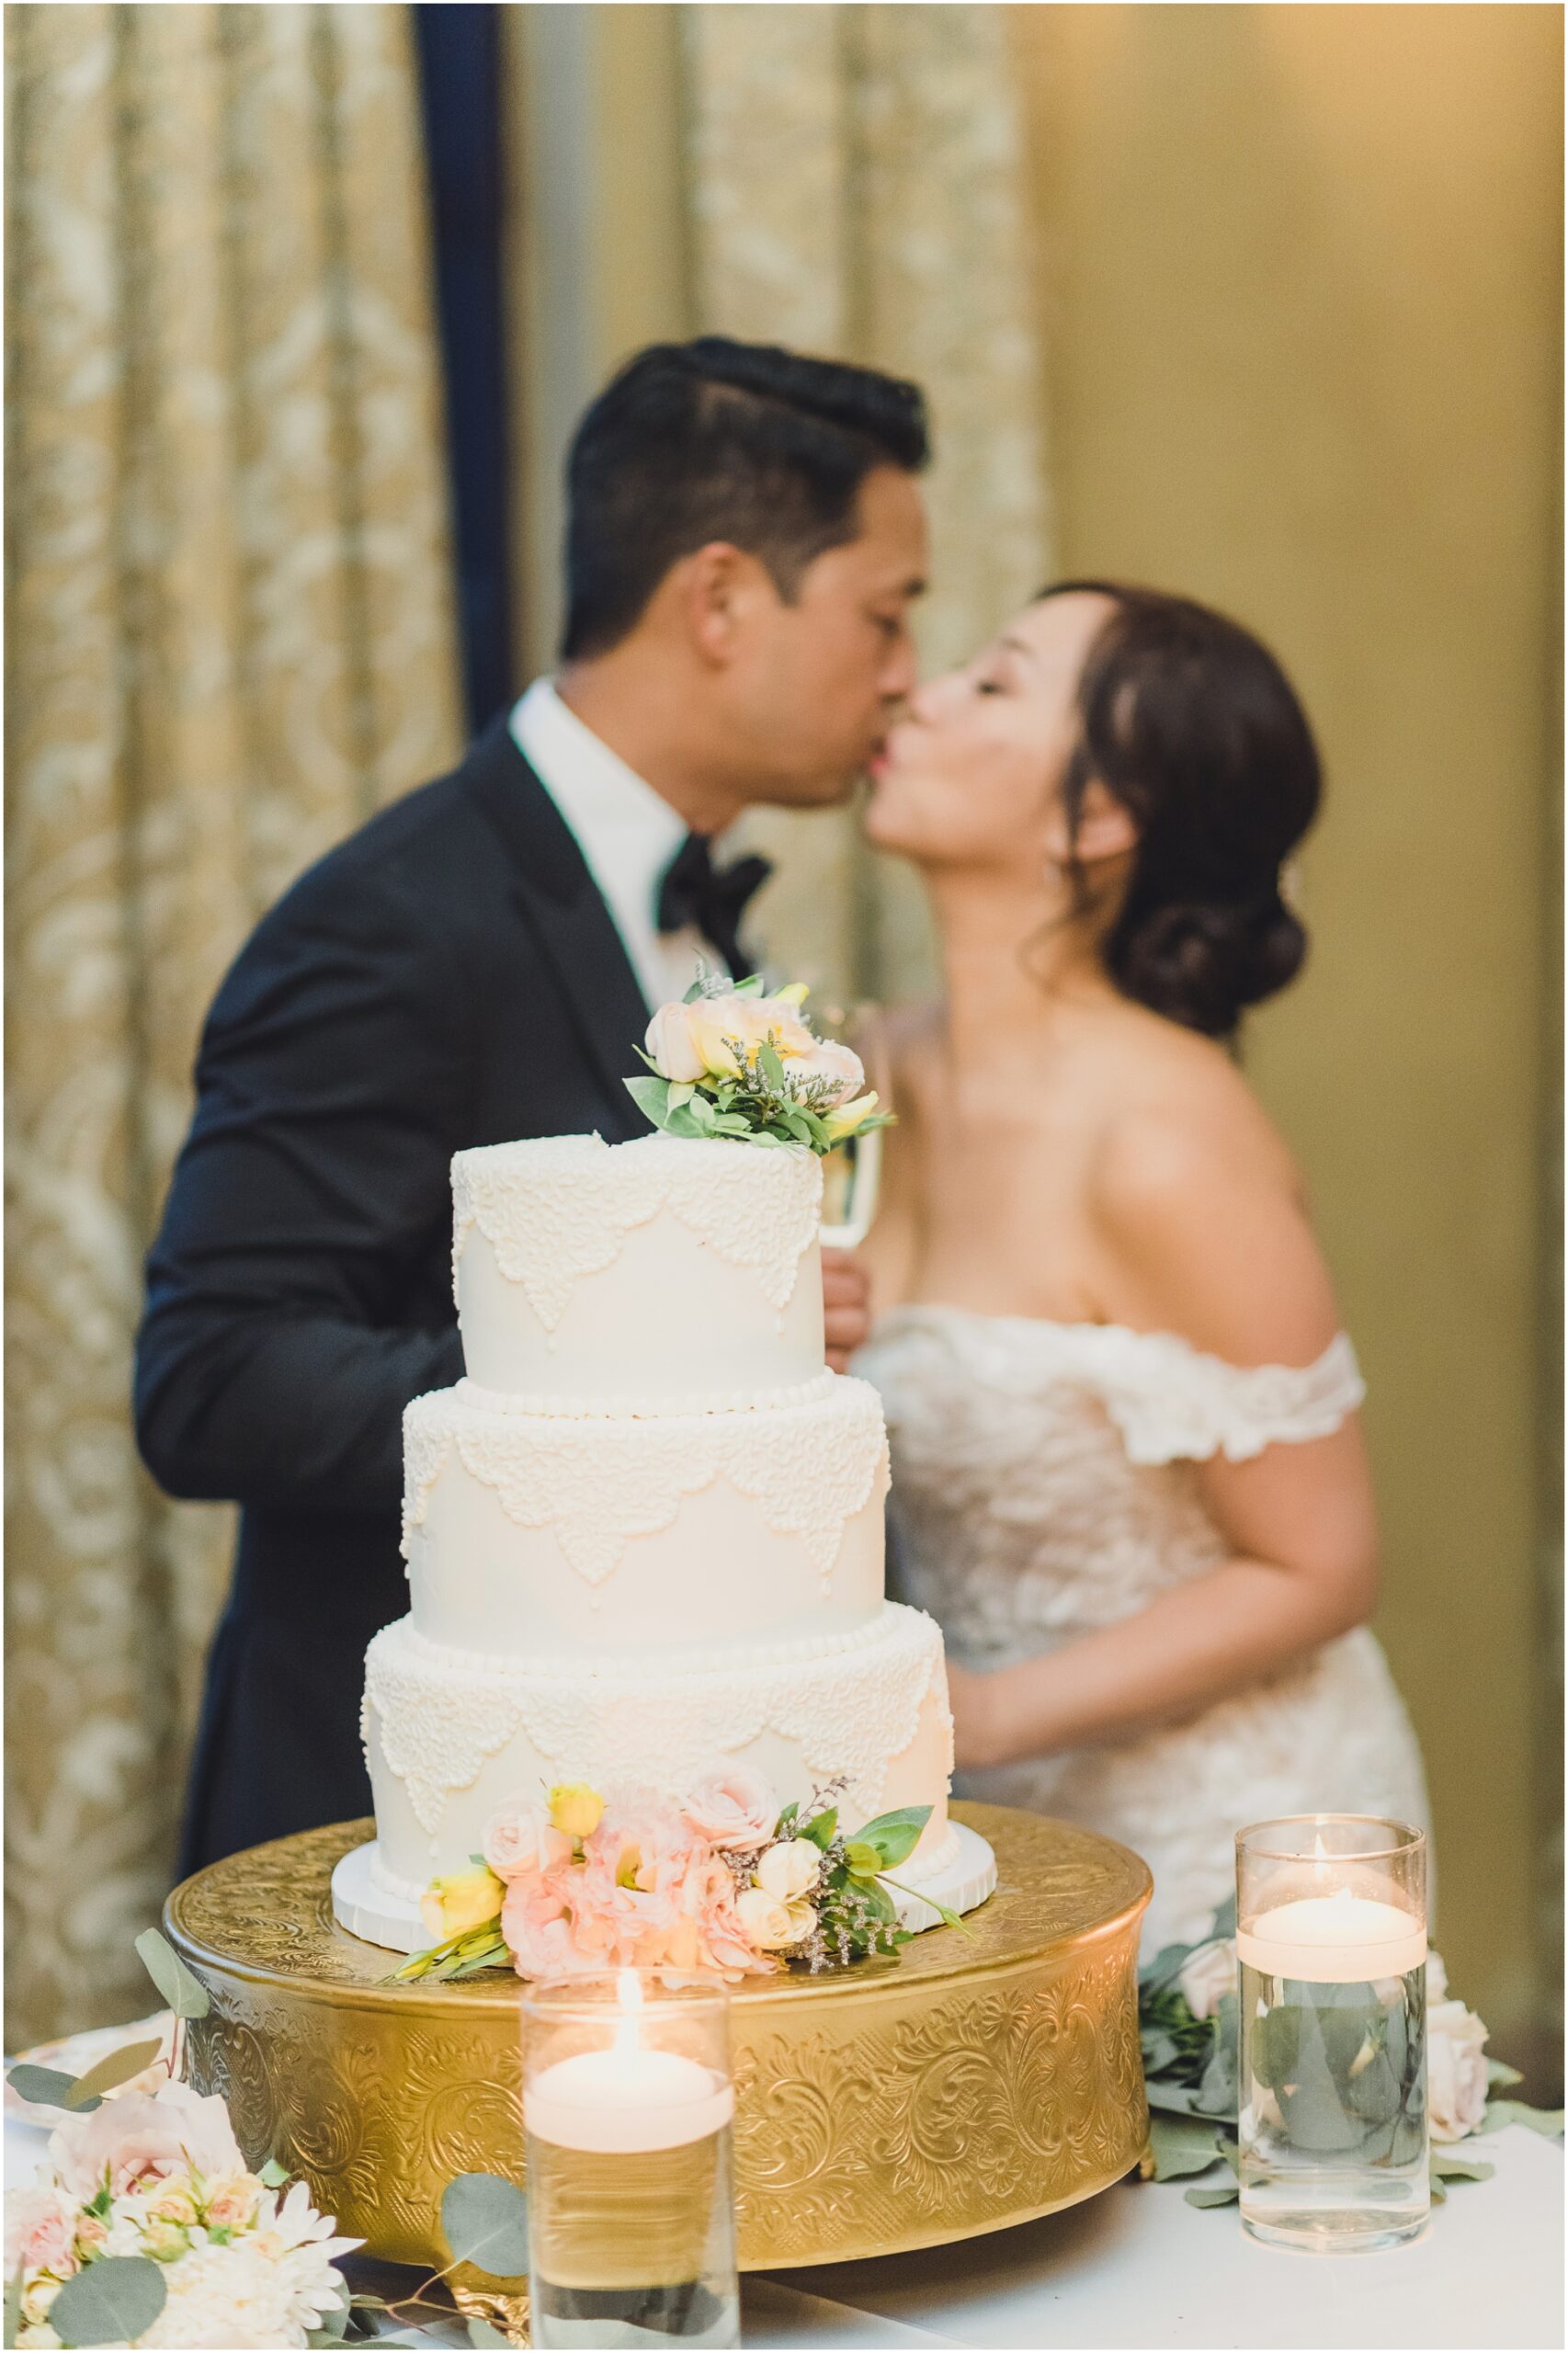 A couple kisses after they cut their wedding cake